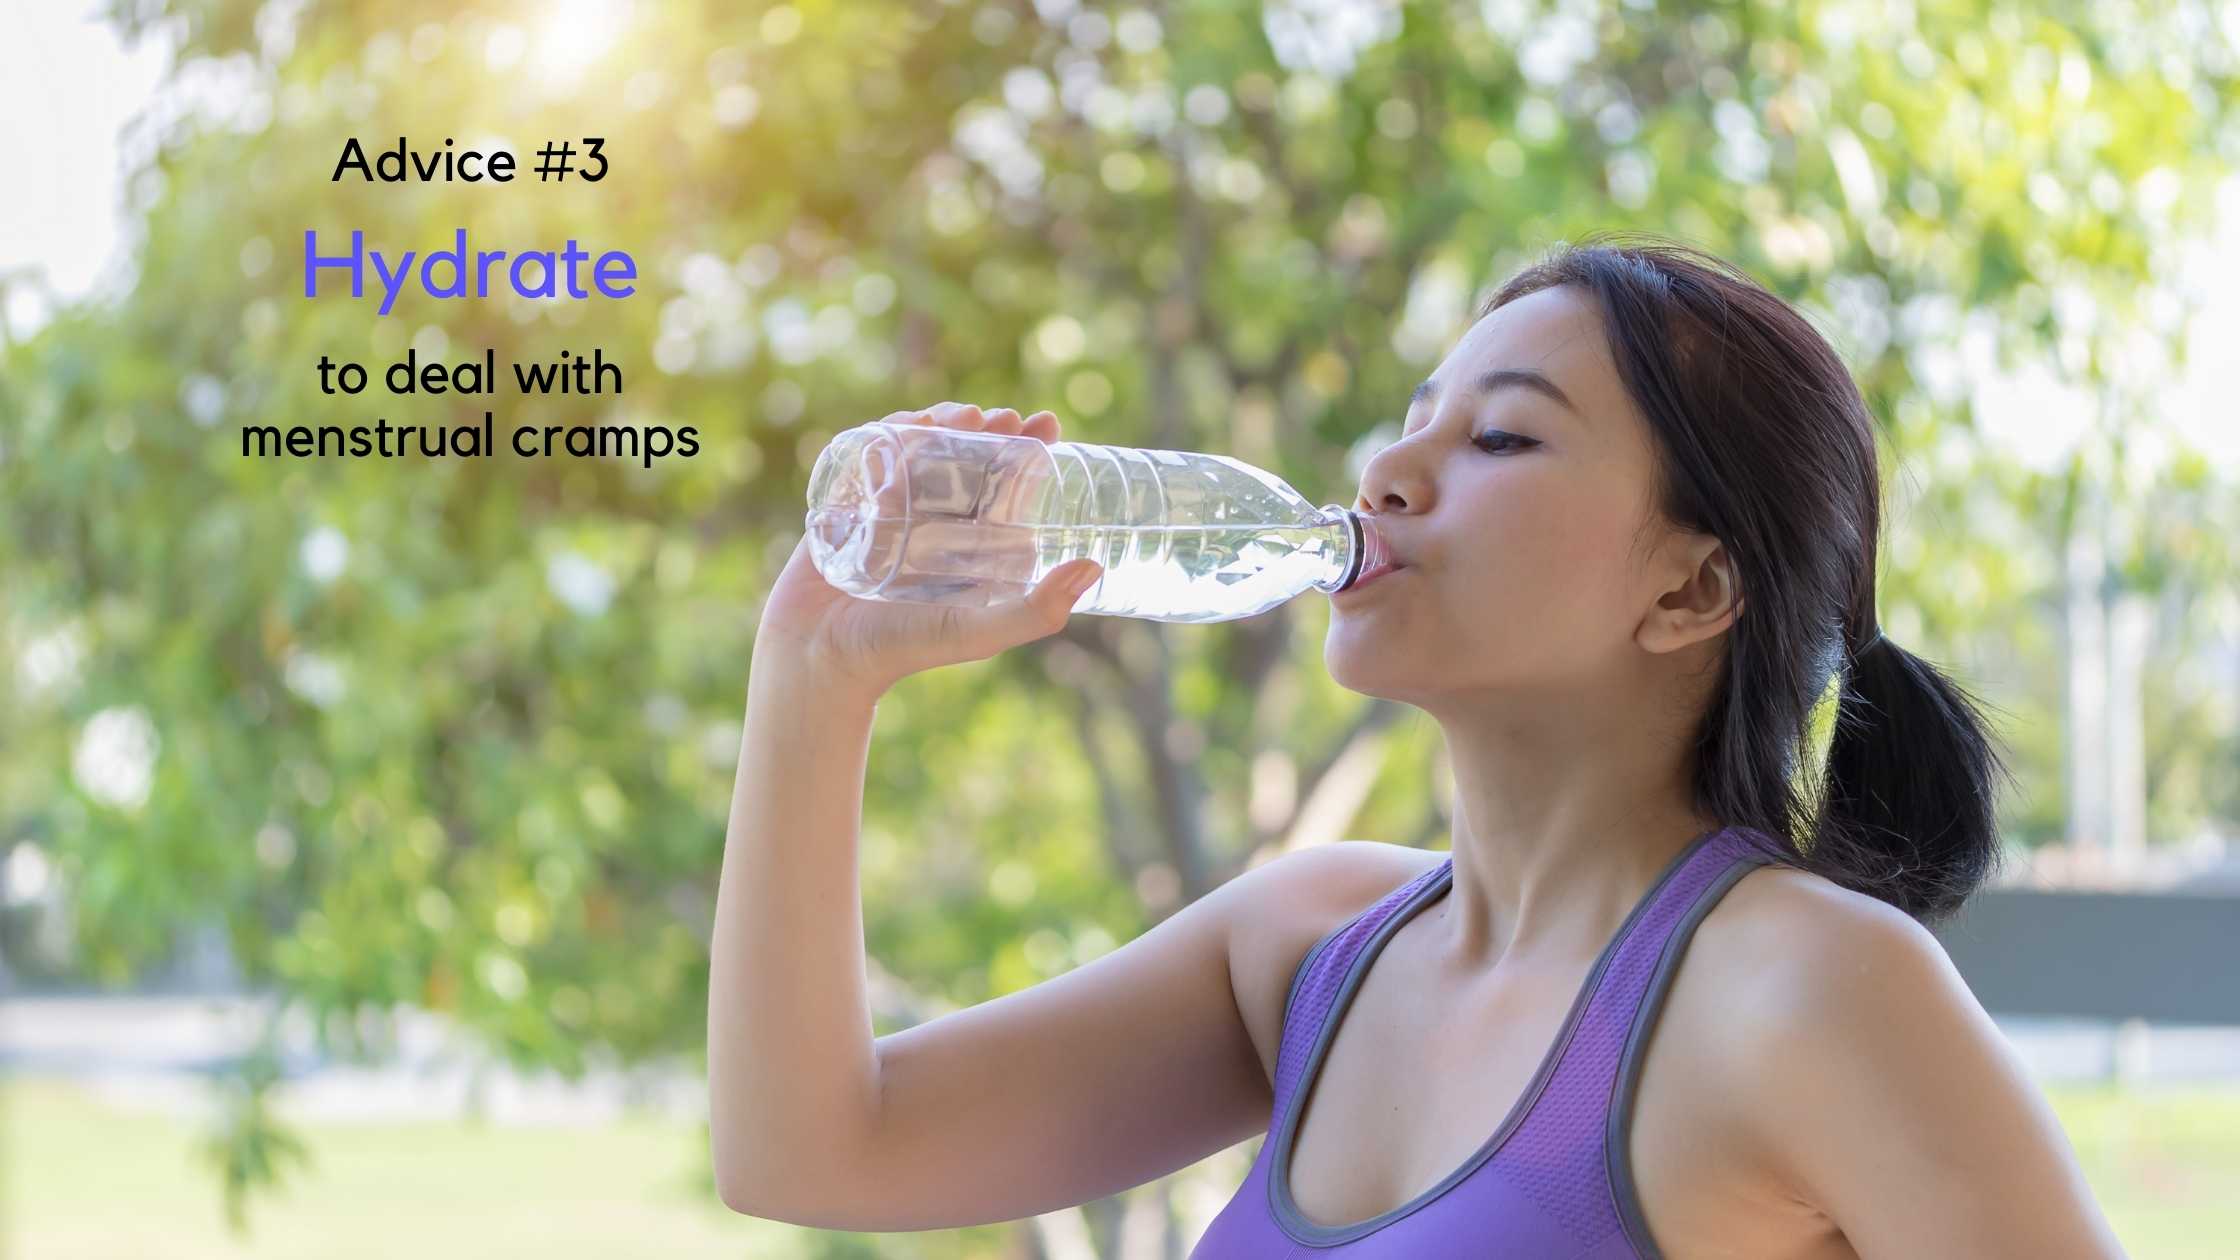 Hydrate to deal with menstrual cramps